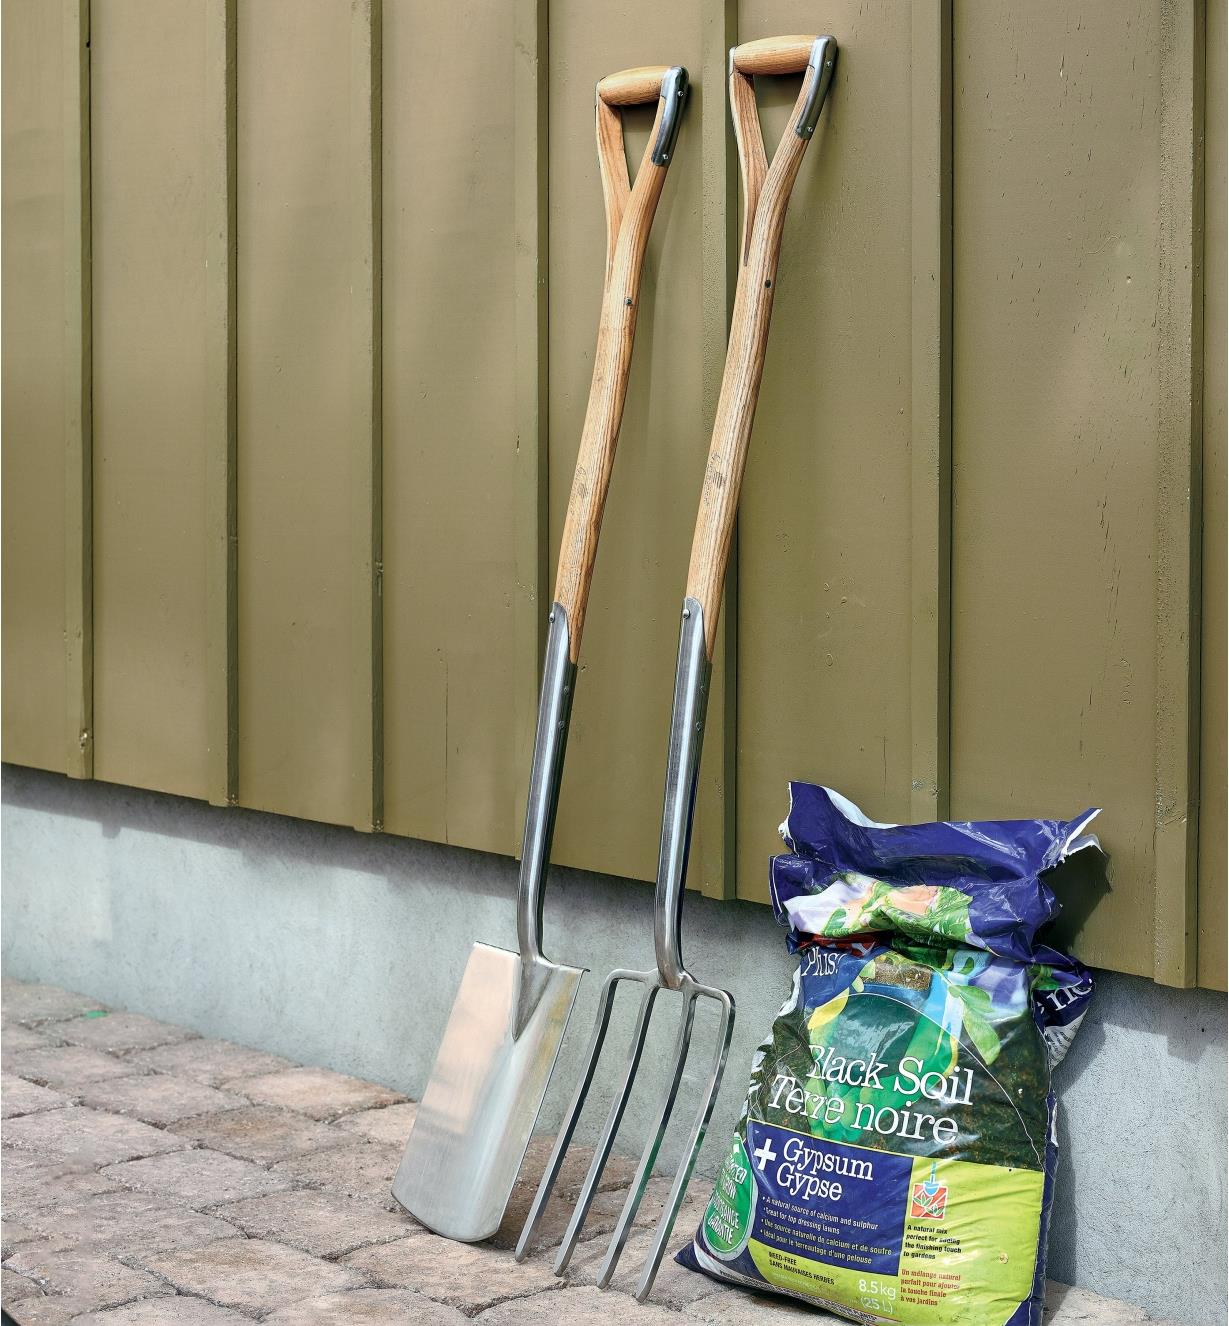 The fork and spade from the ergonomic ash-handled digging spade and fork set lean against a wall